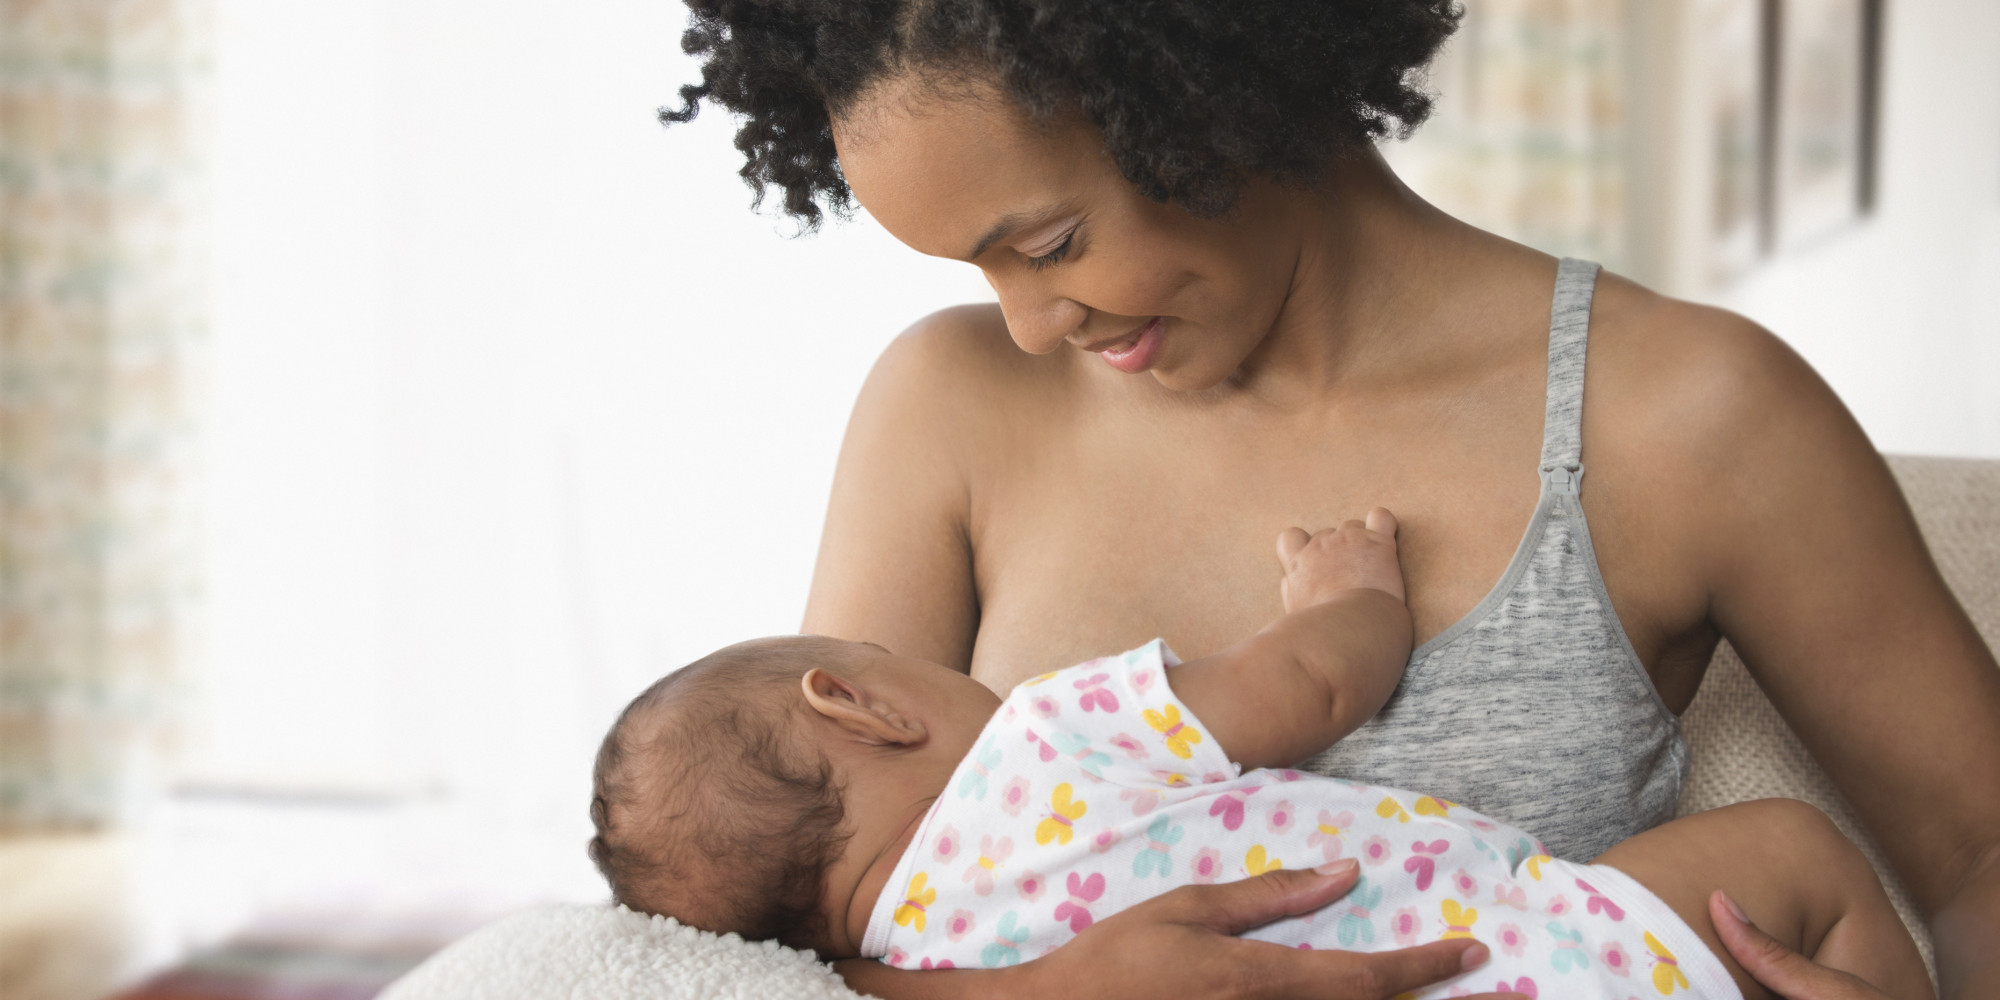 Can A Woman Produce Breast Milk Without Being Pregnant 67